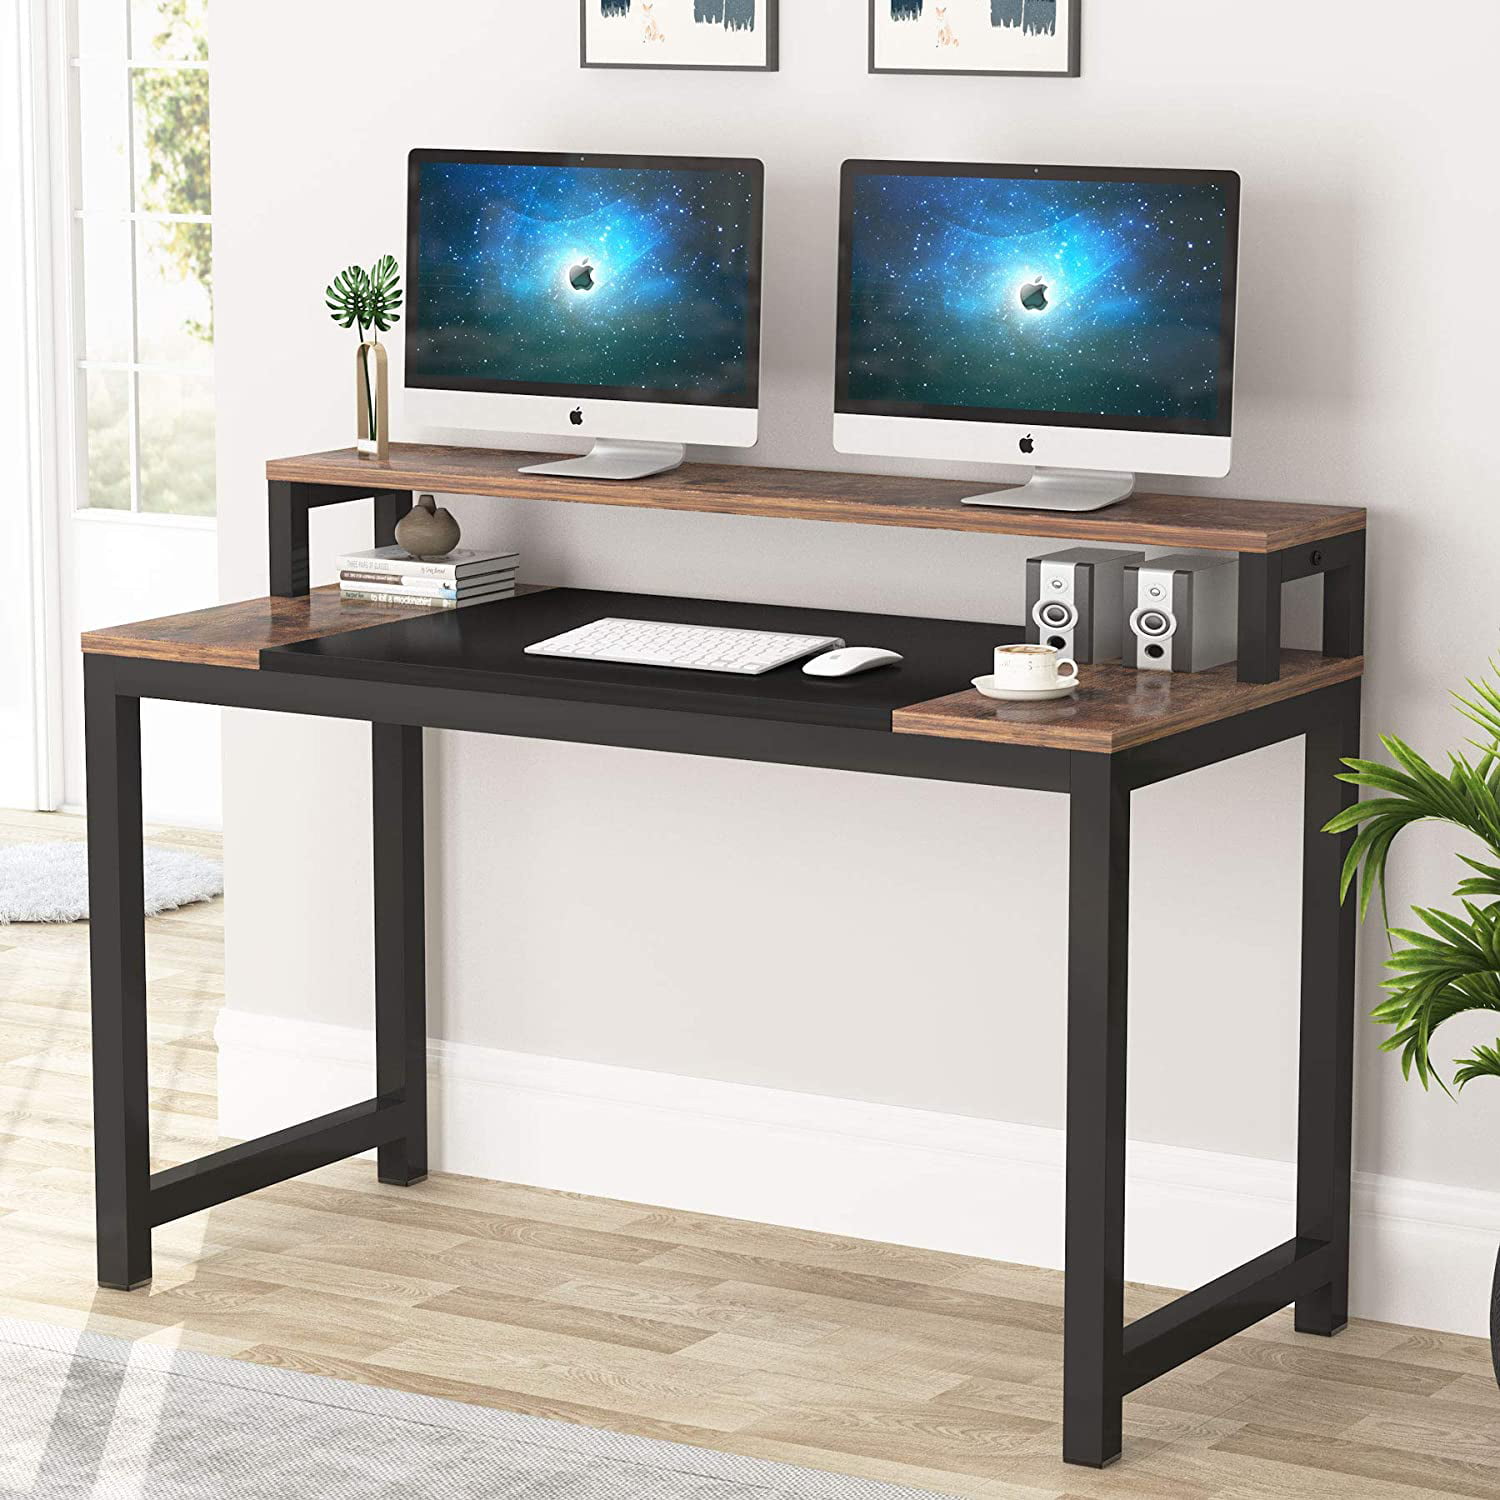 Gaming Table Computer Desk Laptop PC Study Writing Table Home Office Black/White 